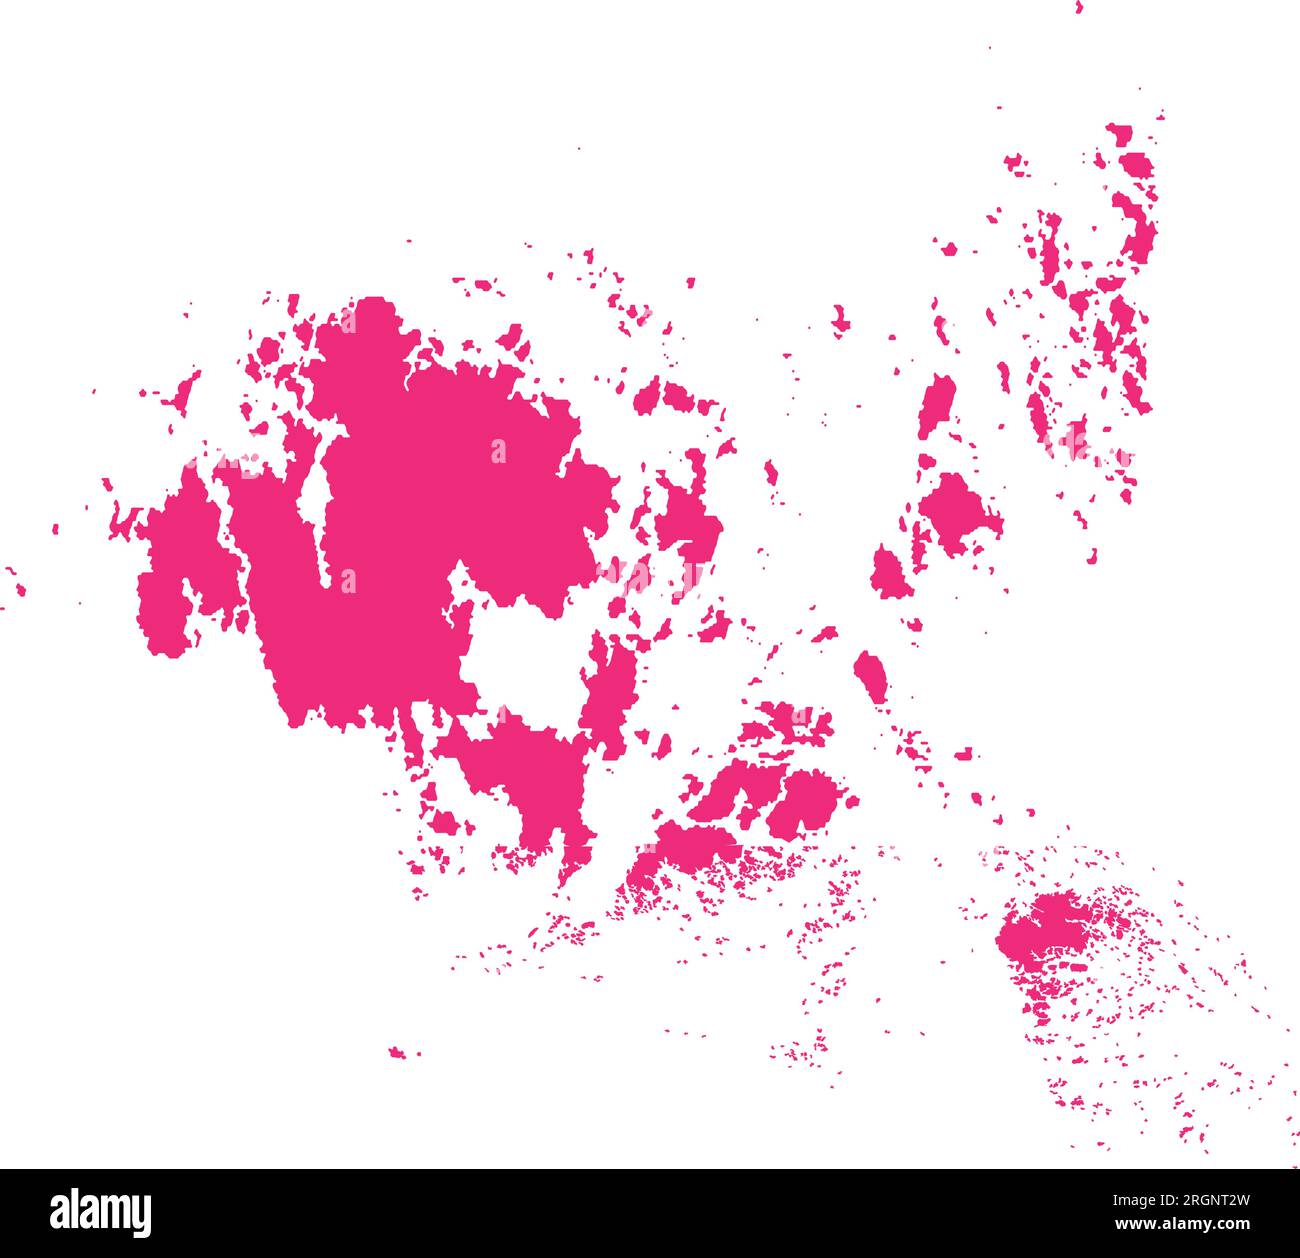 ROSE CMYK color map of ALAND ISLANDS, FINLAND Stock Vector